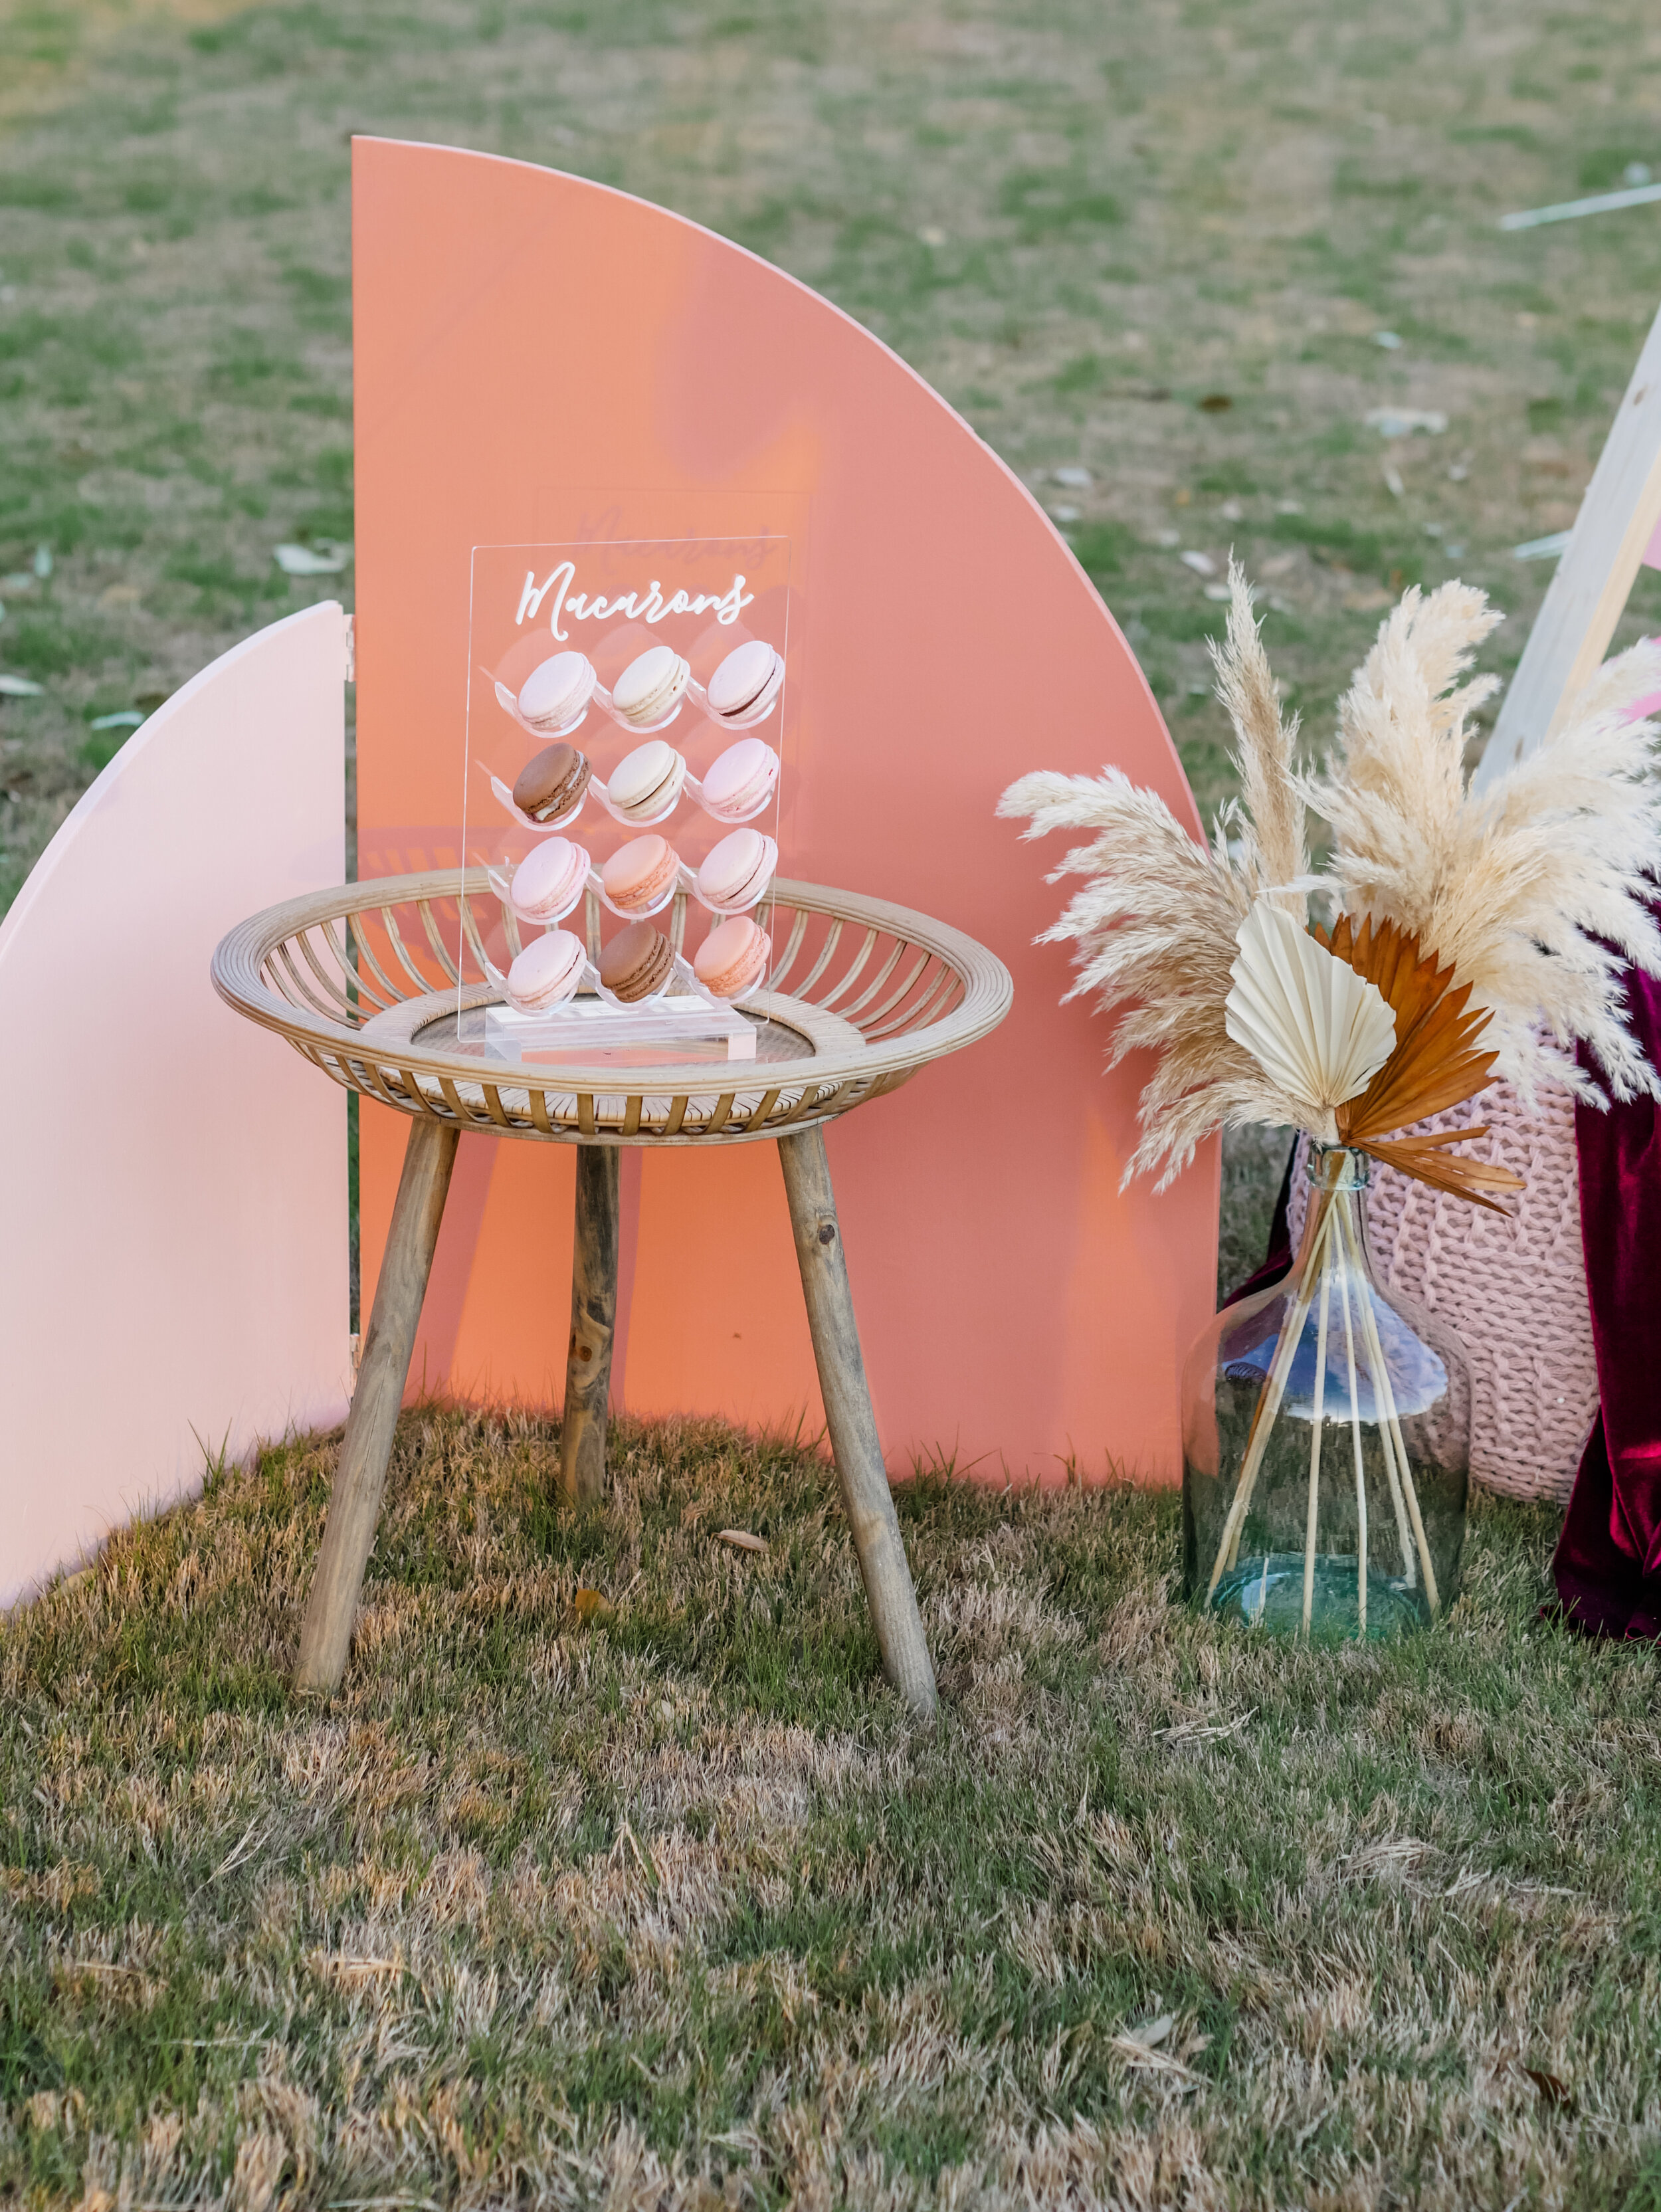  Dessert station for a boho chic luxury backyard Glamping experience - with large rentable tent and picnic area from MINT Event Design in Austin, TX! Perfect for teen slumber parties, birthday parties, or bachelorette parties. See how event designer 